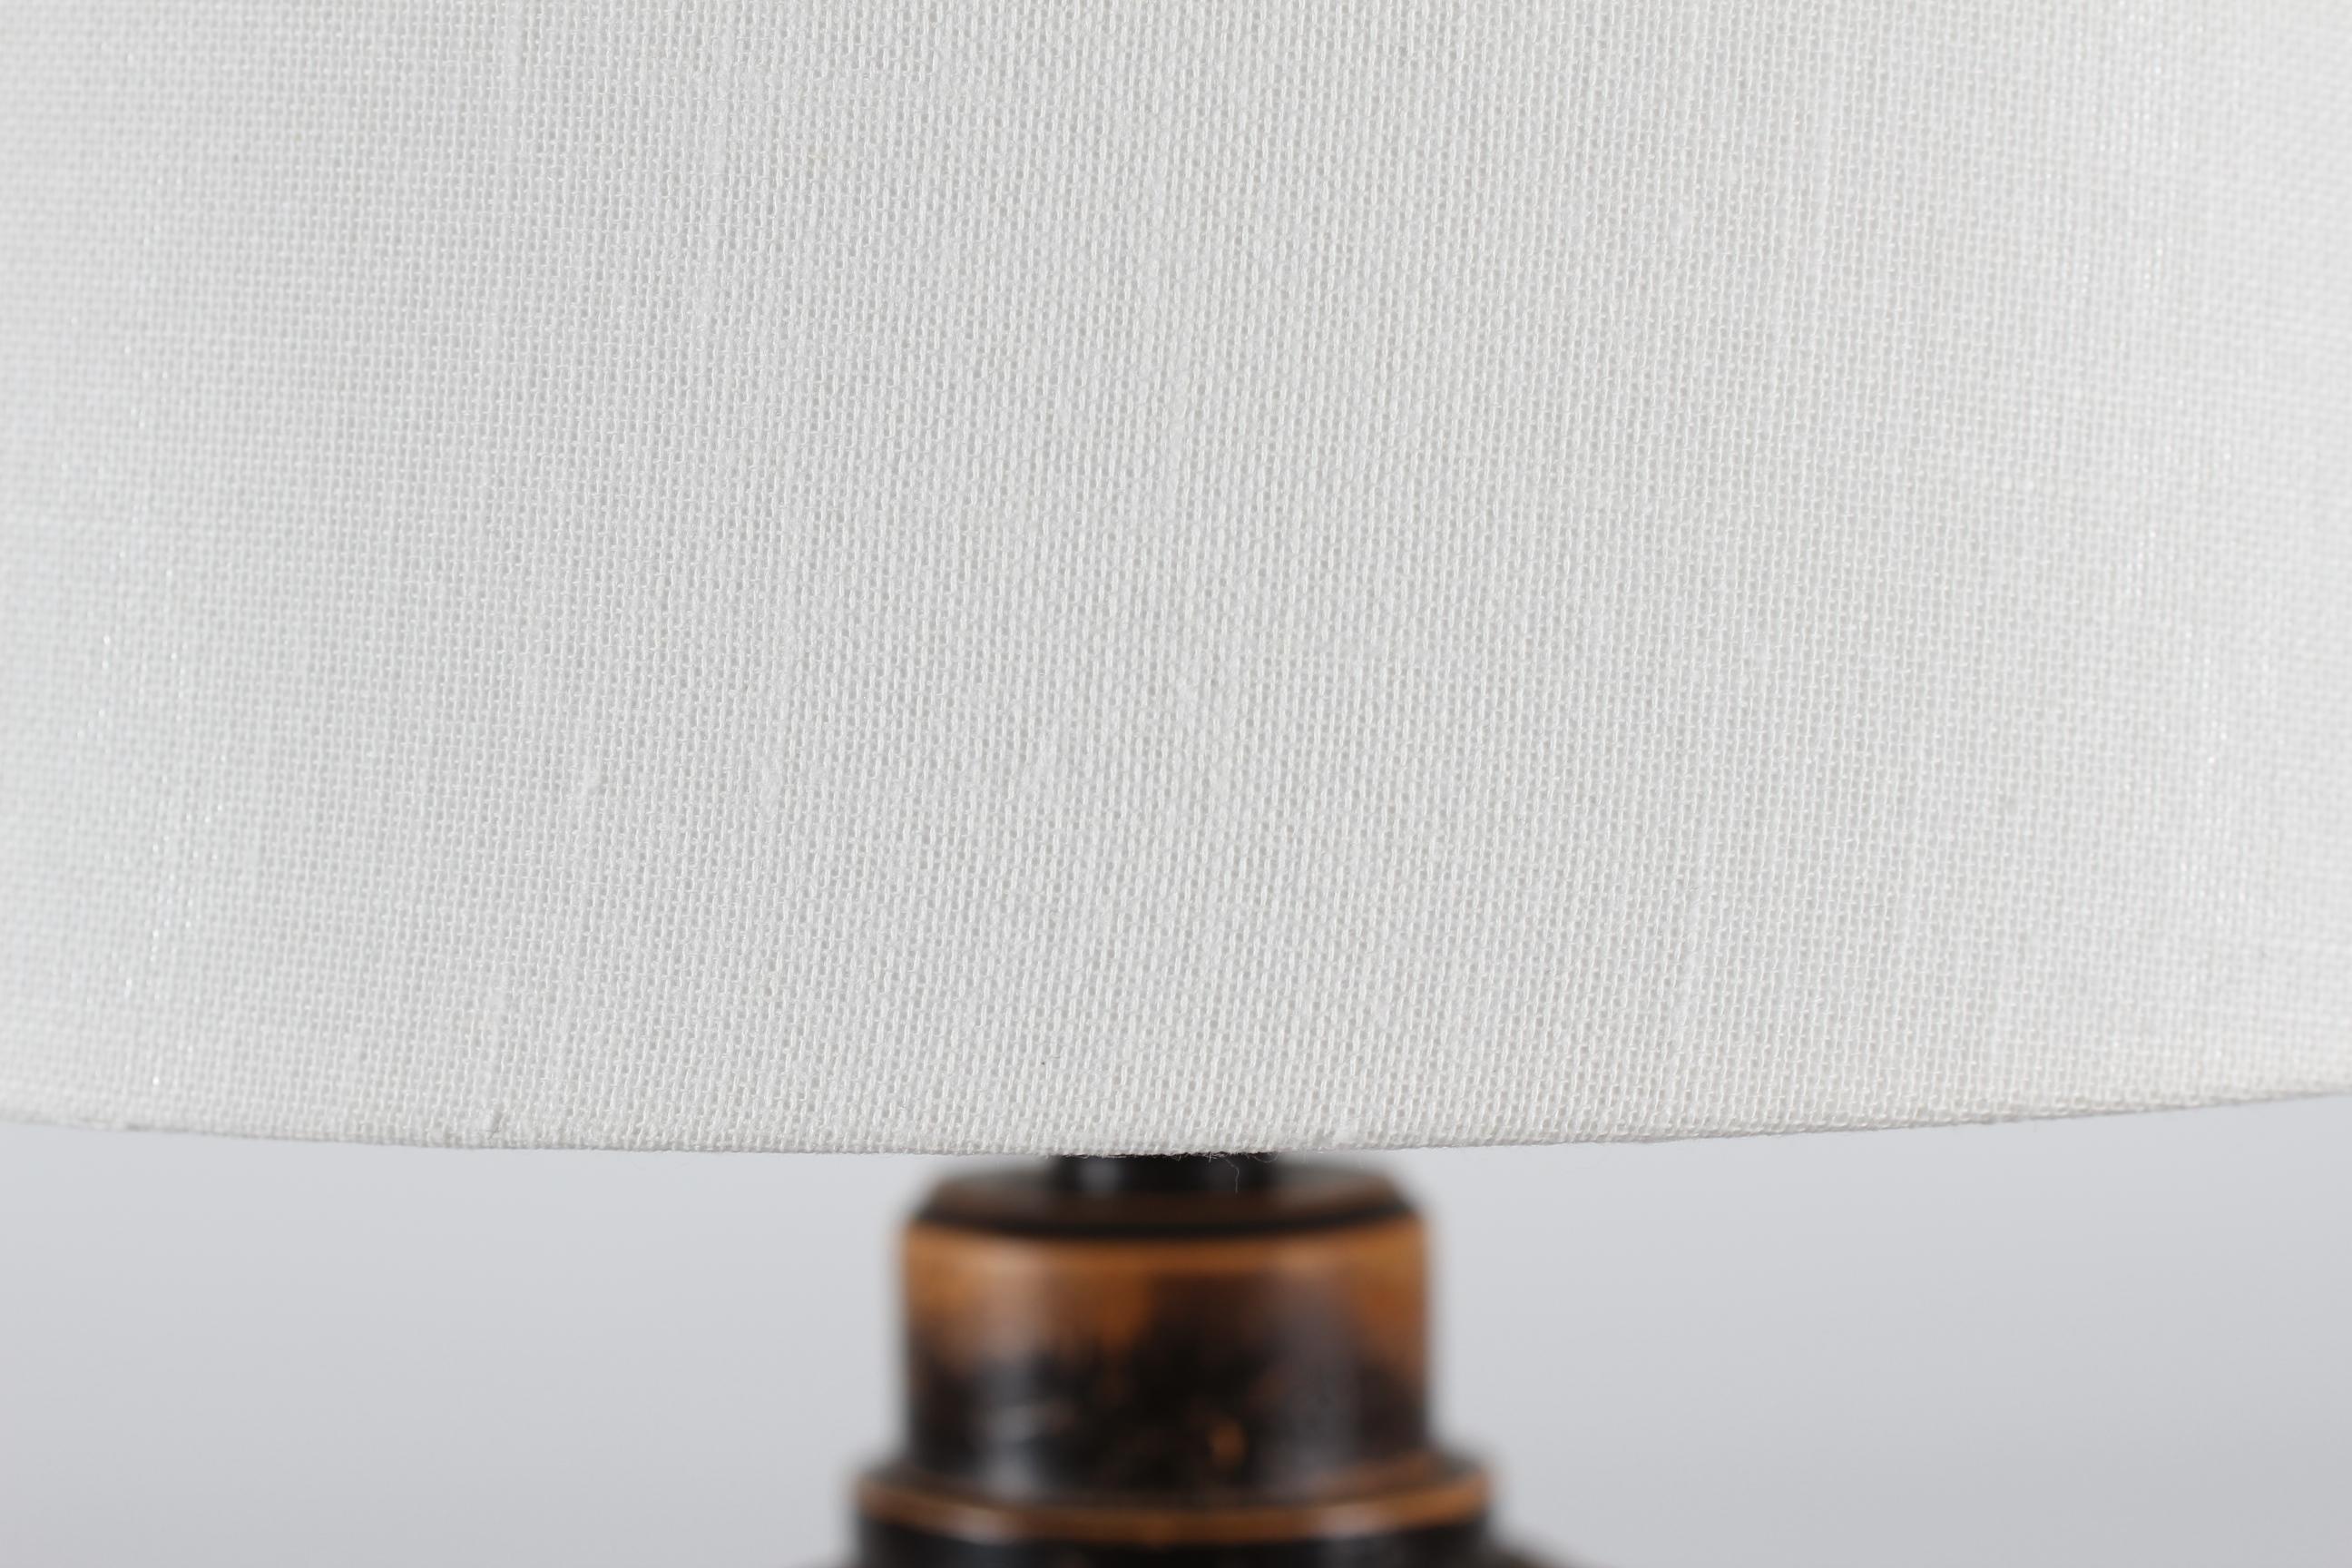 Danish Art Deco Table Lamp Melon Shaped of Painted Carved Wood, Circa 1940s For Sale 1